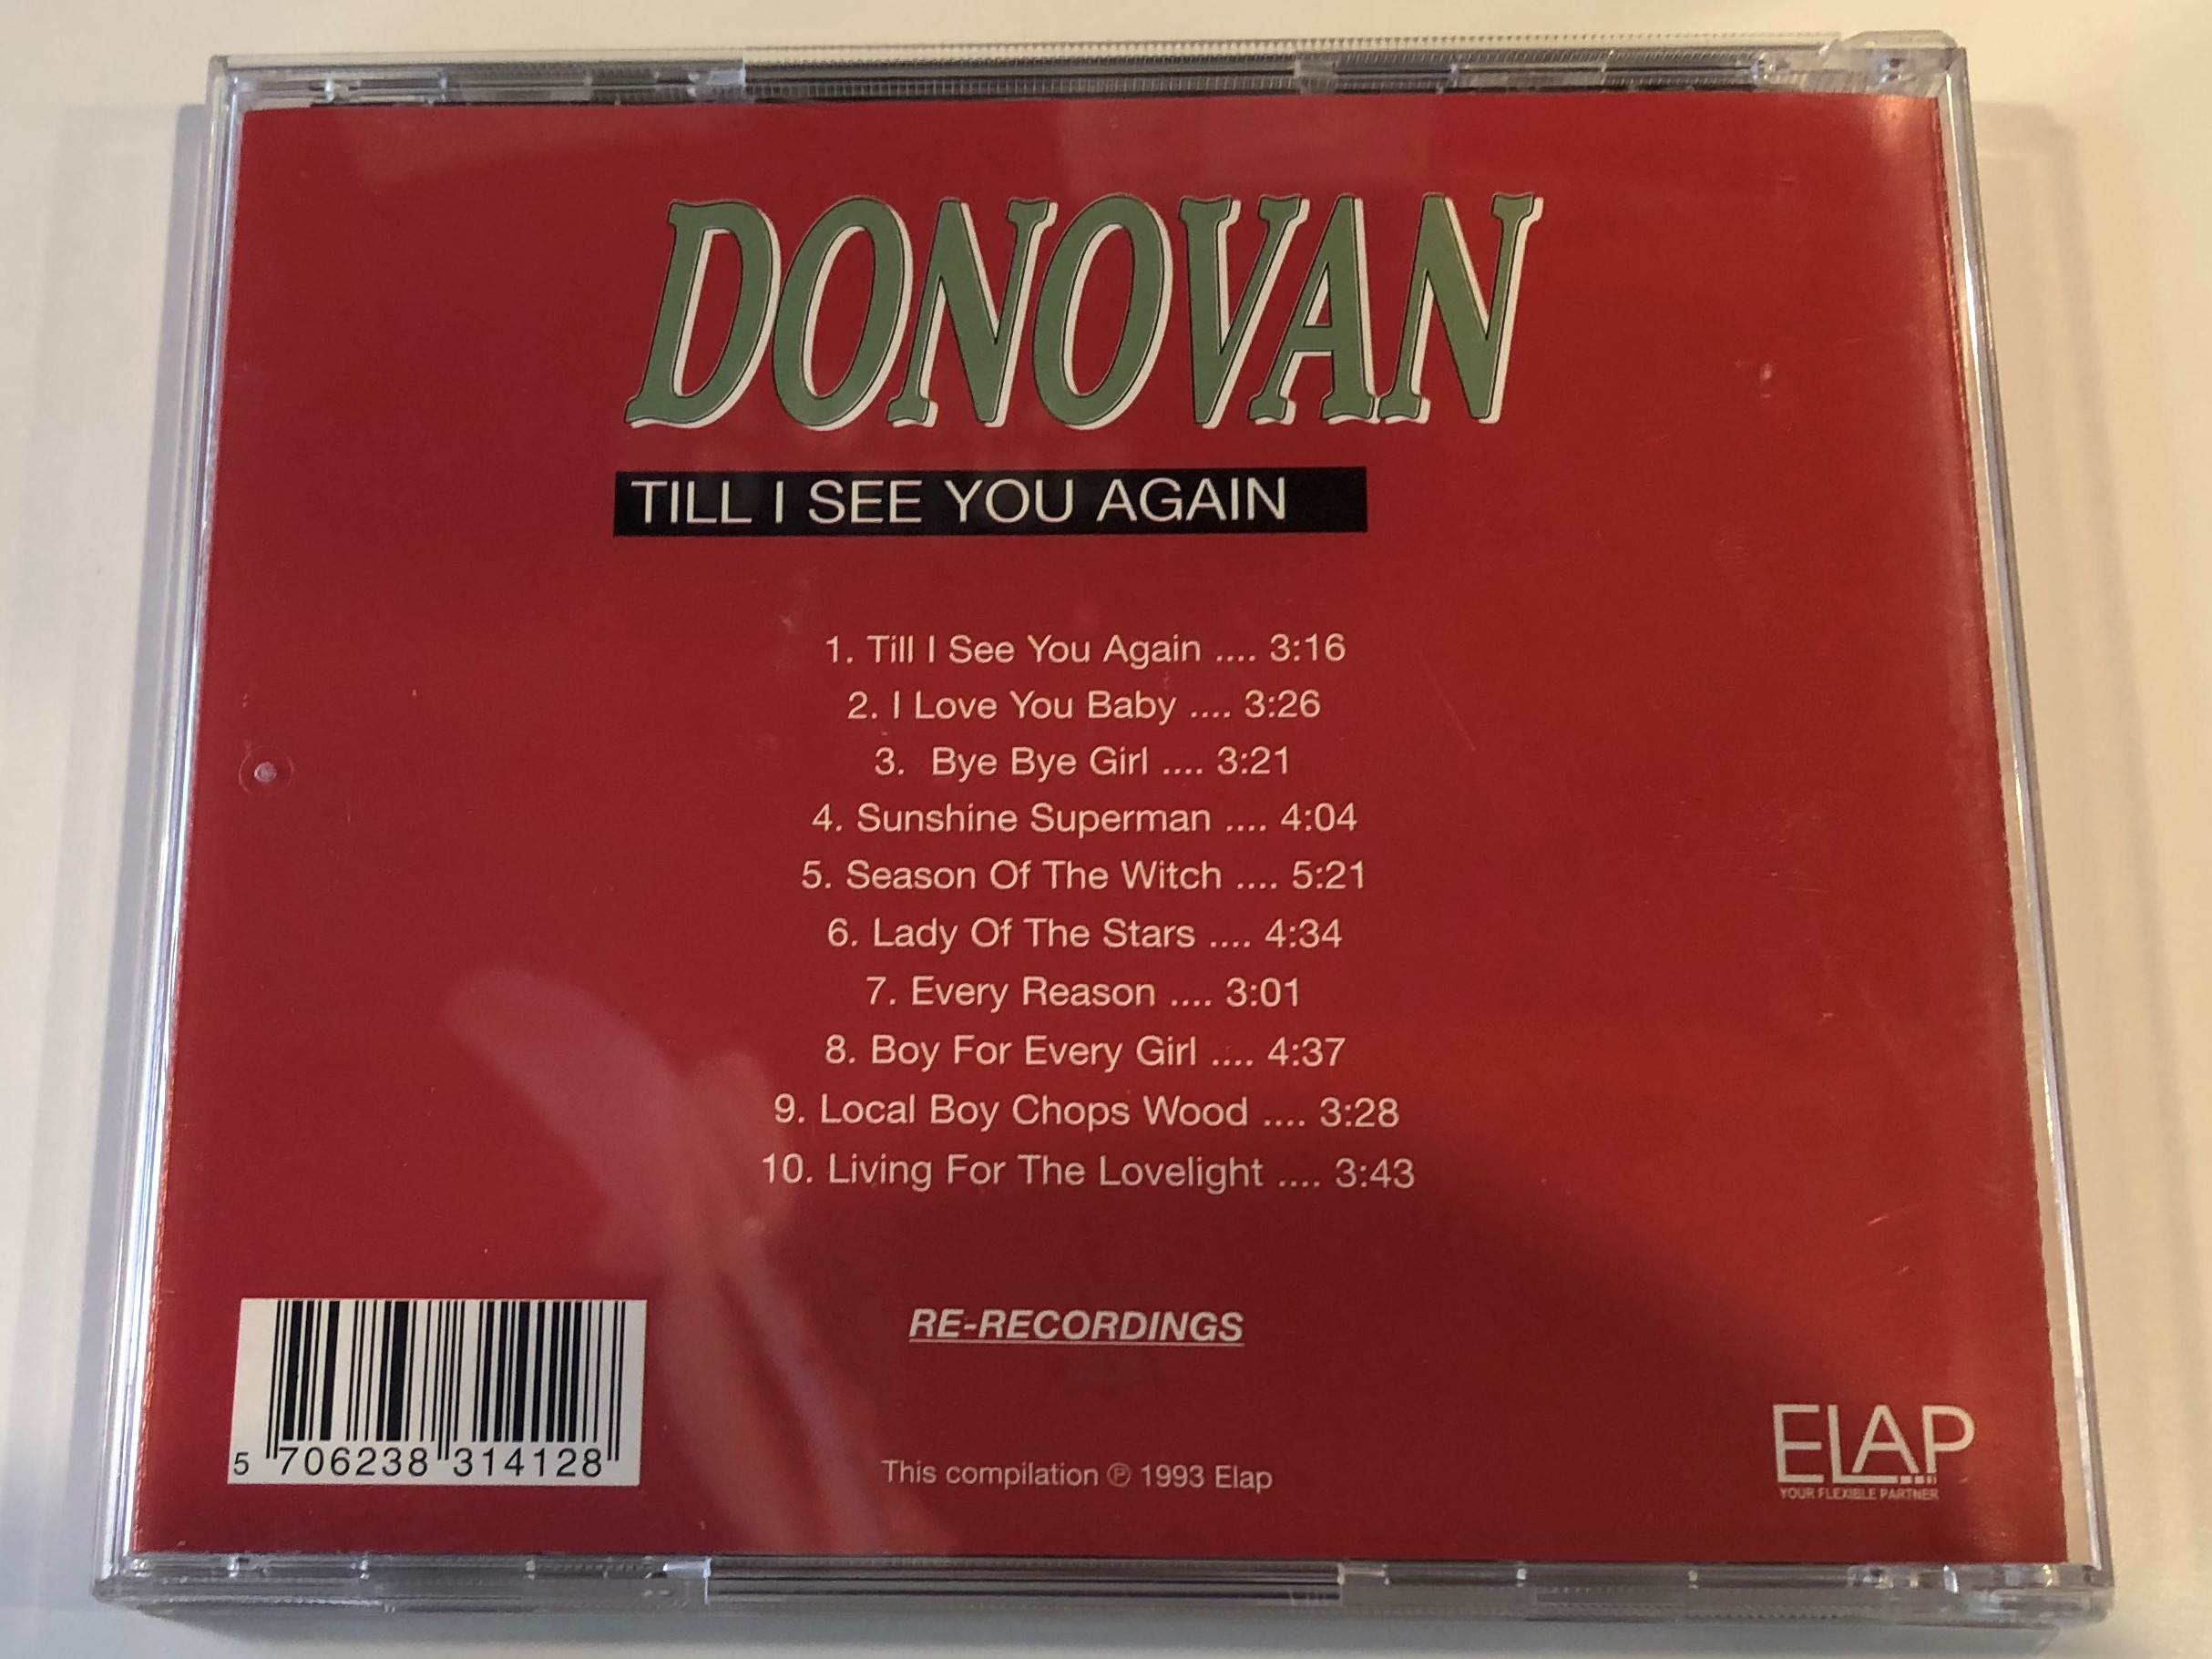 donovan-till-i-see-you-again-season-of-the-witch-bye-bye-girl-for-every-boy-there-is-a-girl-i-love-you-baby-and-many-more...-elap-music-audio-cd-1993-50171252-3-.jpg